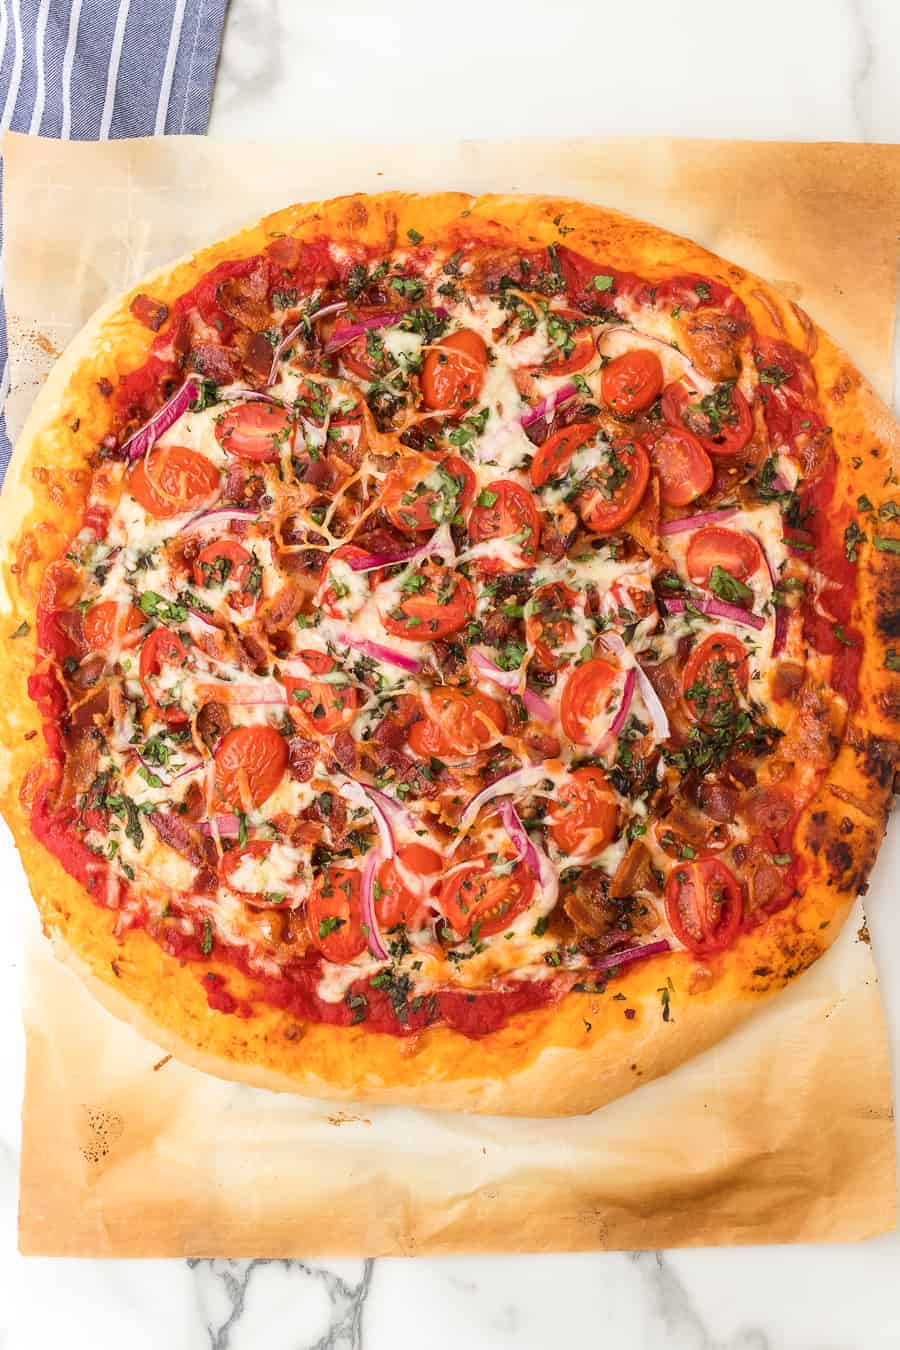 Homemade pizza dough topped with bacon, cheese, tomatoes, and herbs is the perfect pizza to make tonight. Your whole family will love it! #pizza #homemadepizza #tomatobaconpizza